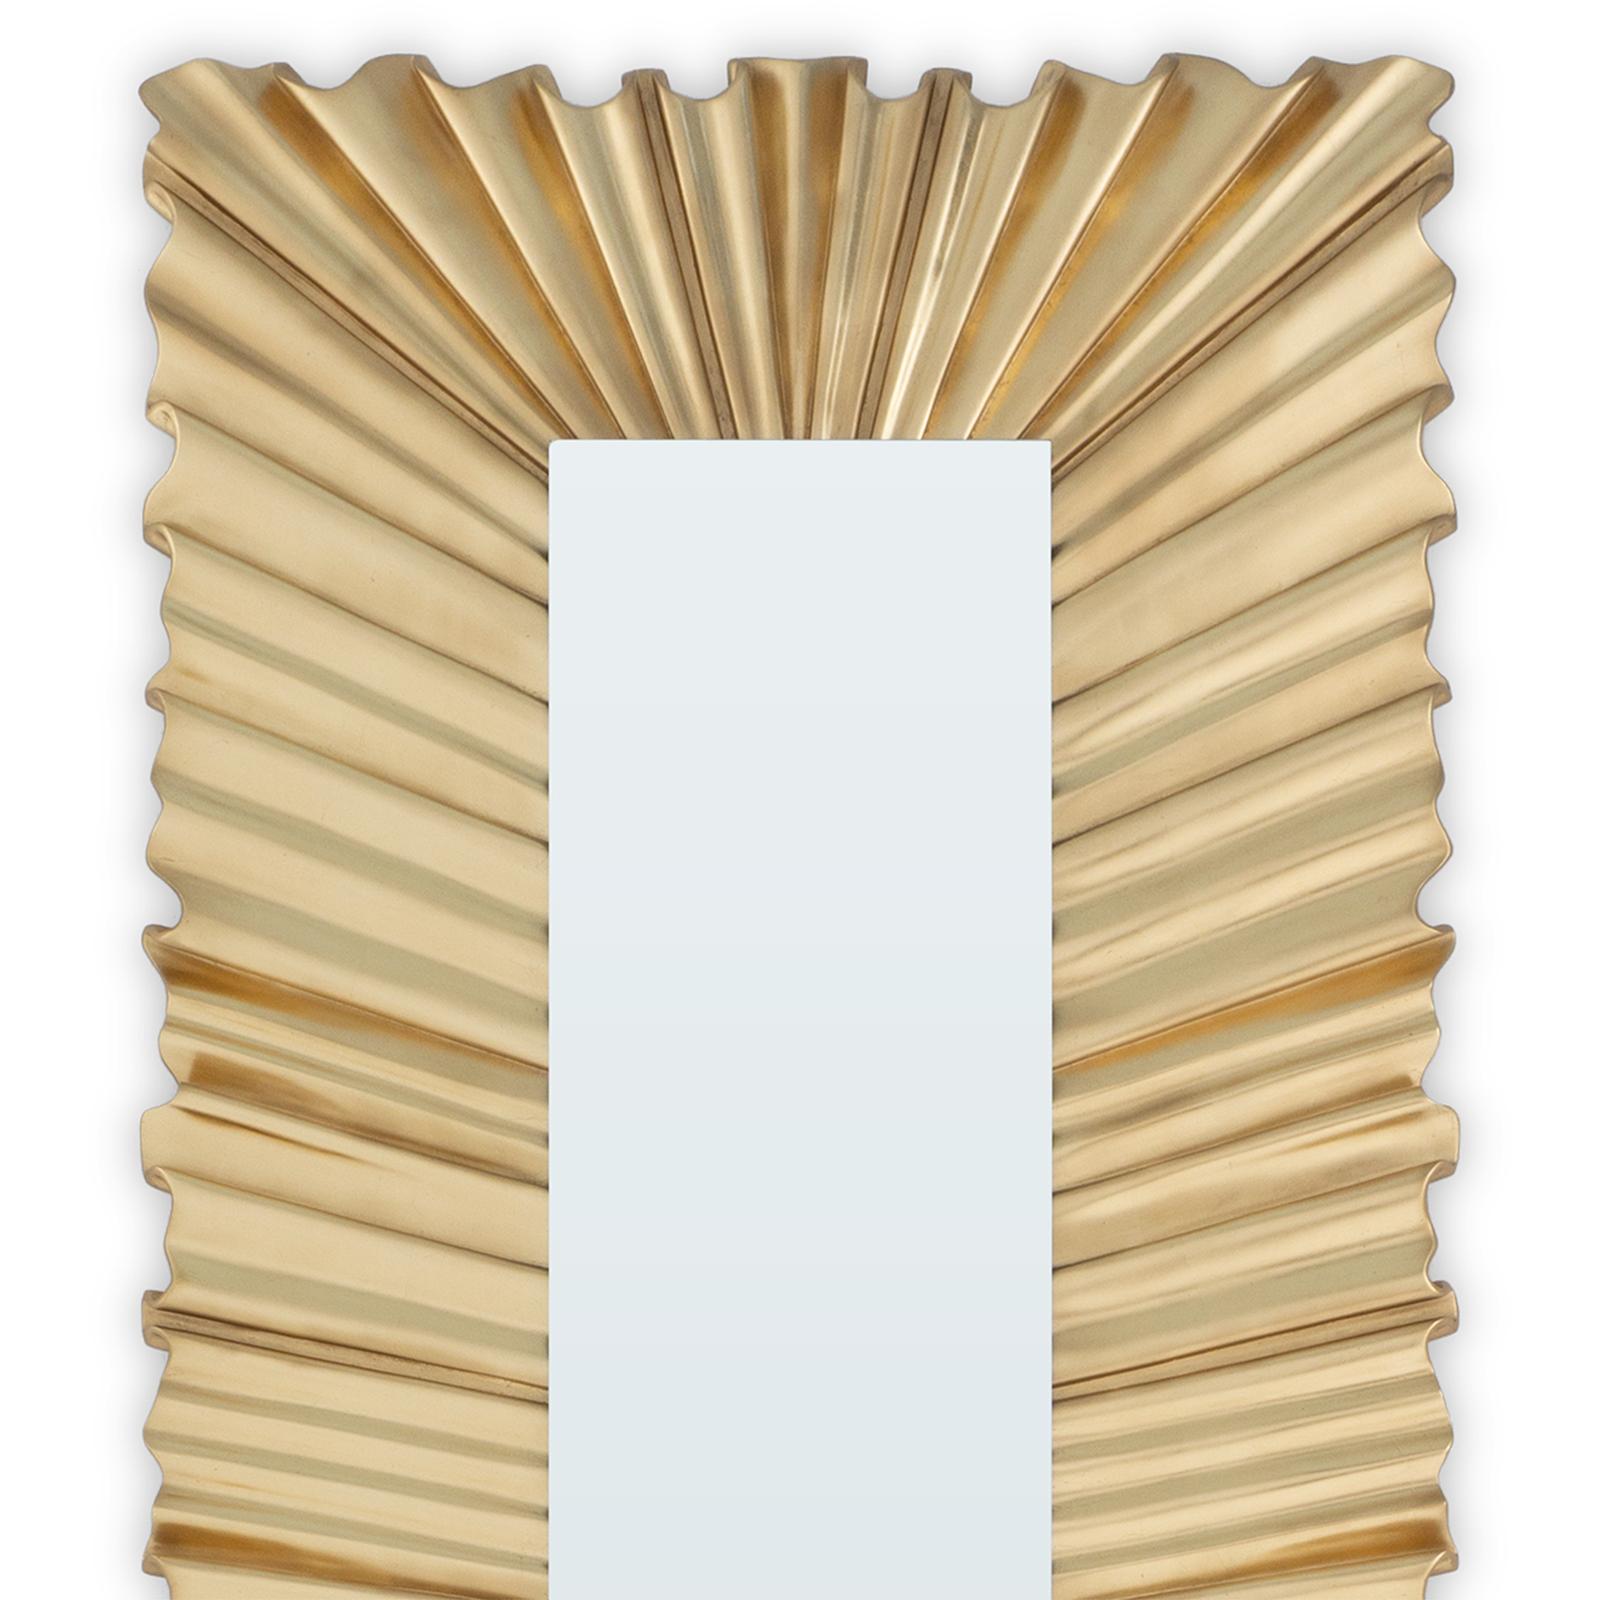 Mirror Thousands Leaf with hand-carved solid 
wood frame hand-painted with gold leaf paint.
With bevelled mirror glass.
Also available in silver paint finish or in coffee finish.

